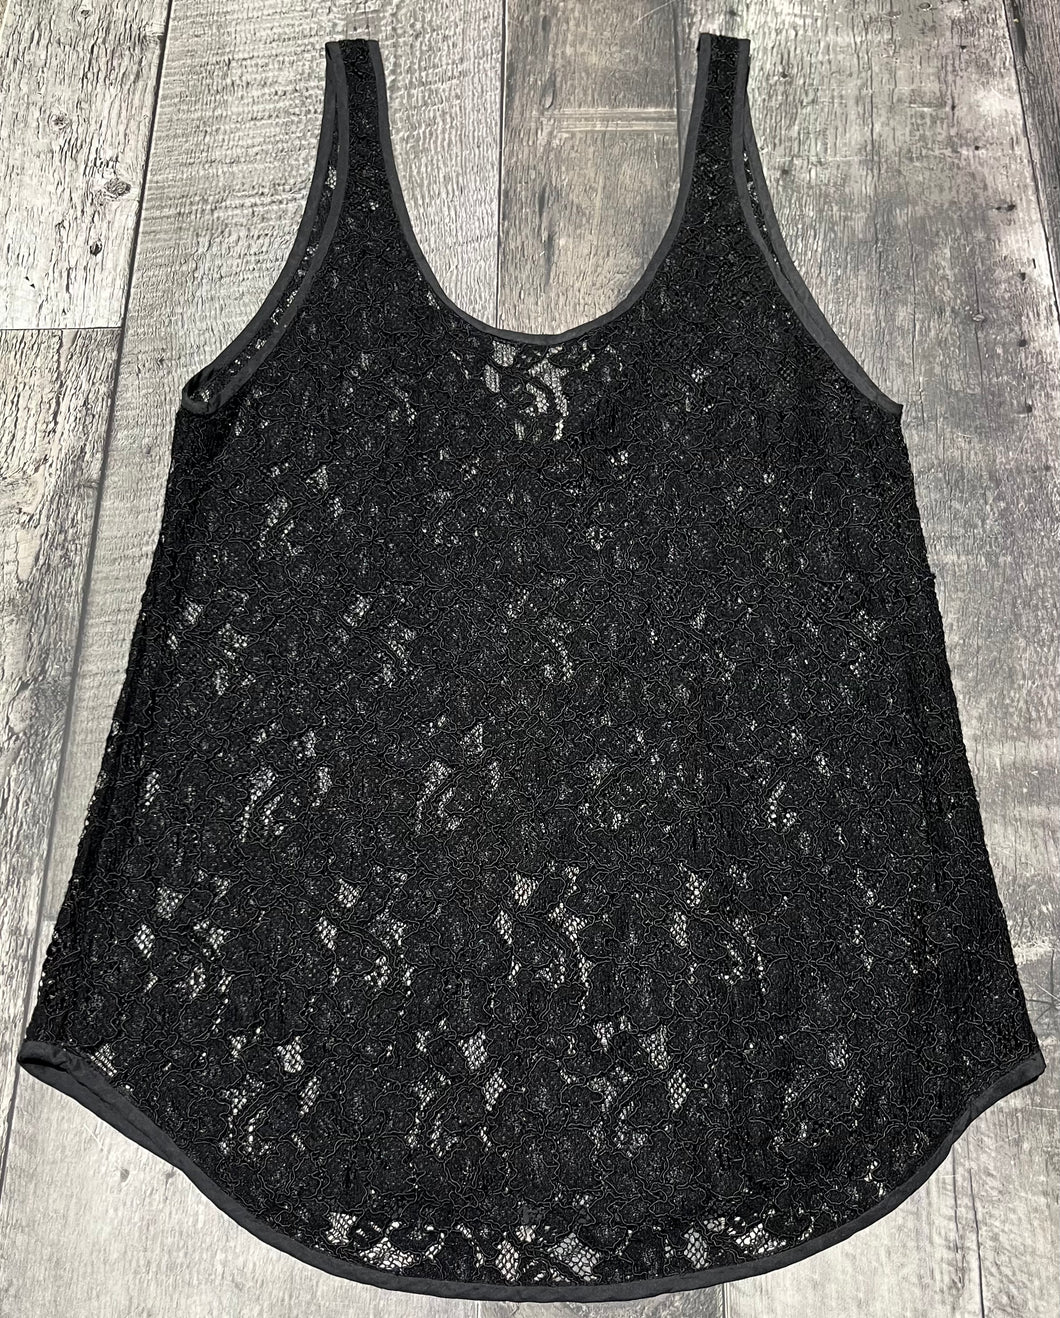 Wilfred black lace tank top - Hers size XS